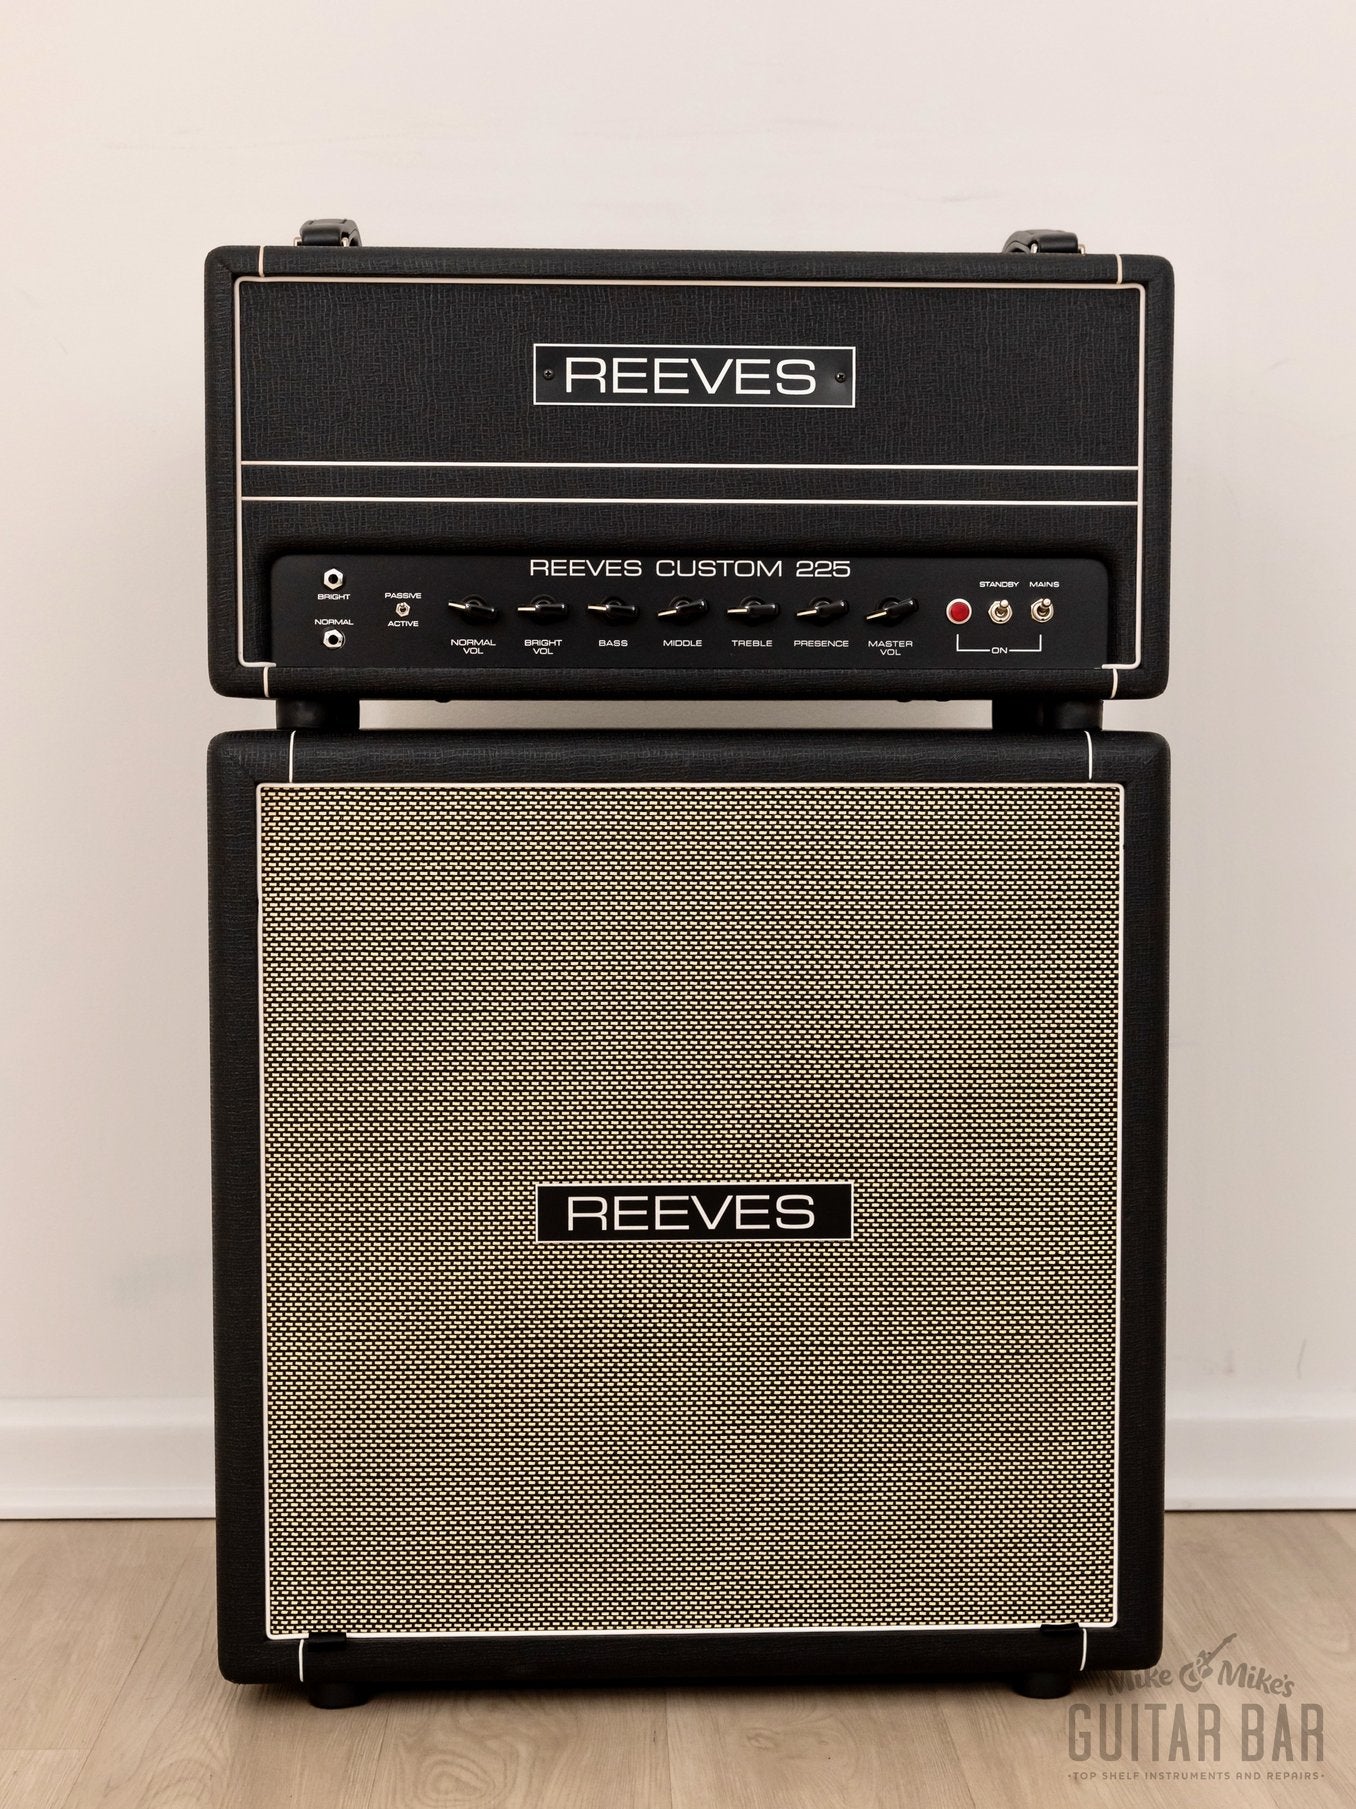 Reeves Custom 225 Boutique Tube Bass Amp Stack w/ 4x10 Cabinet, KT88